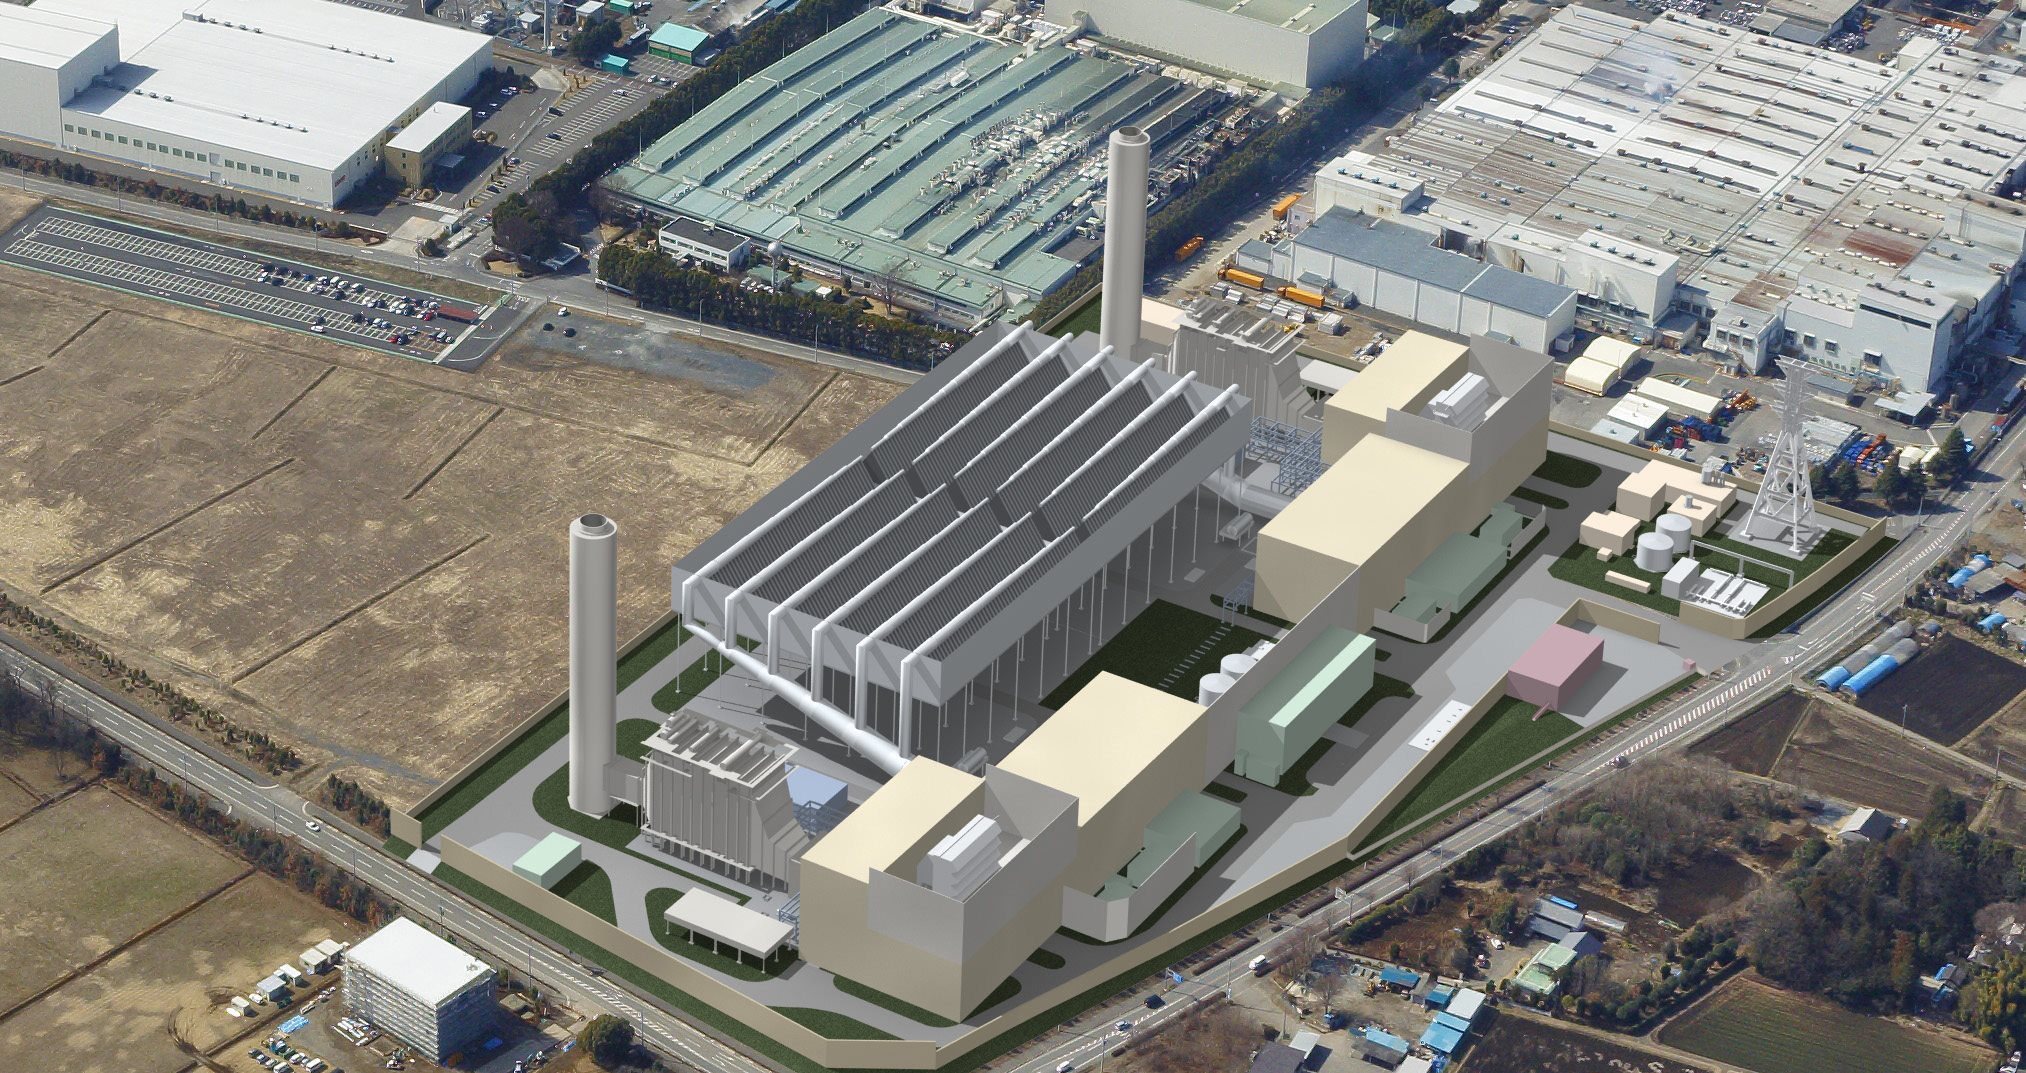 Visualisation showing the proposed power plant from above